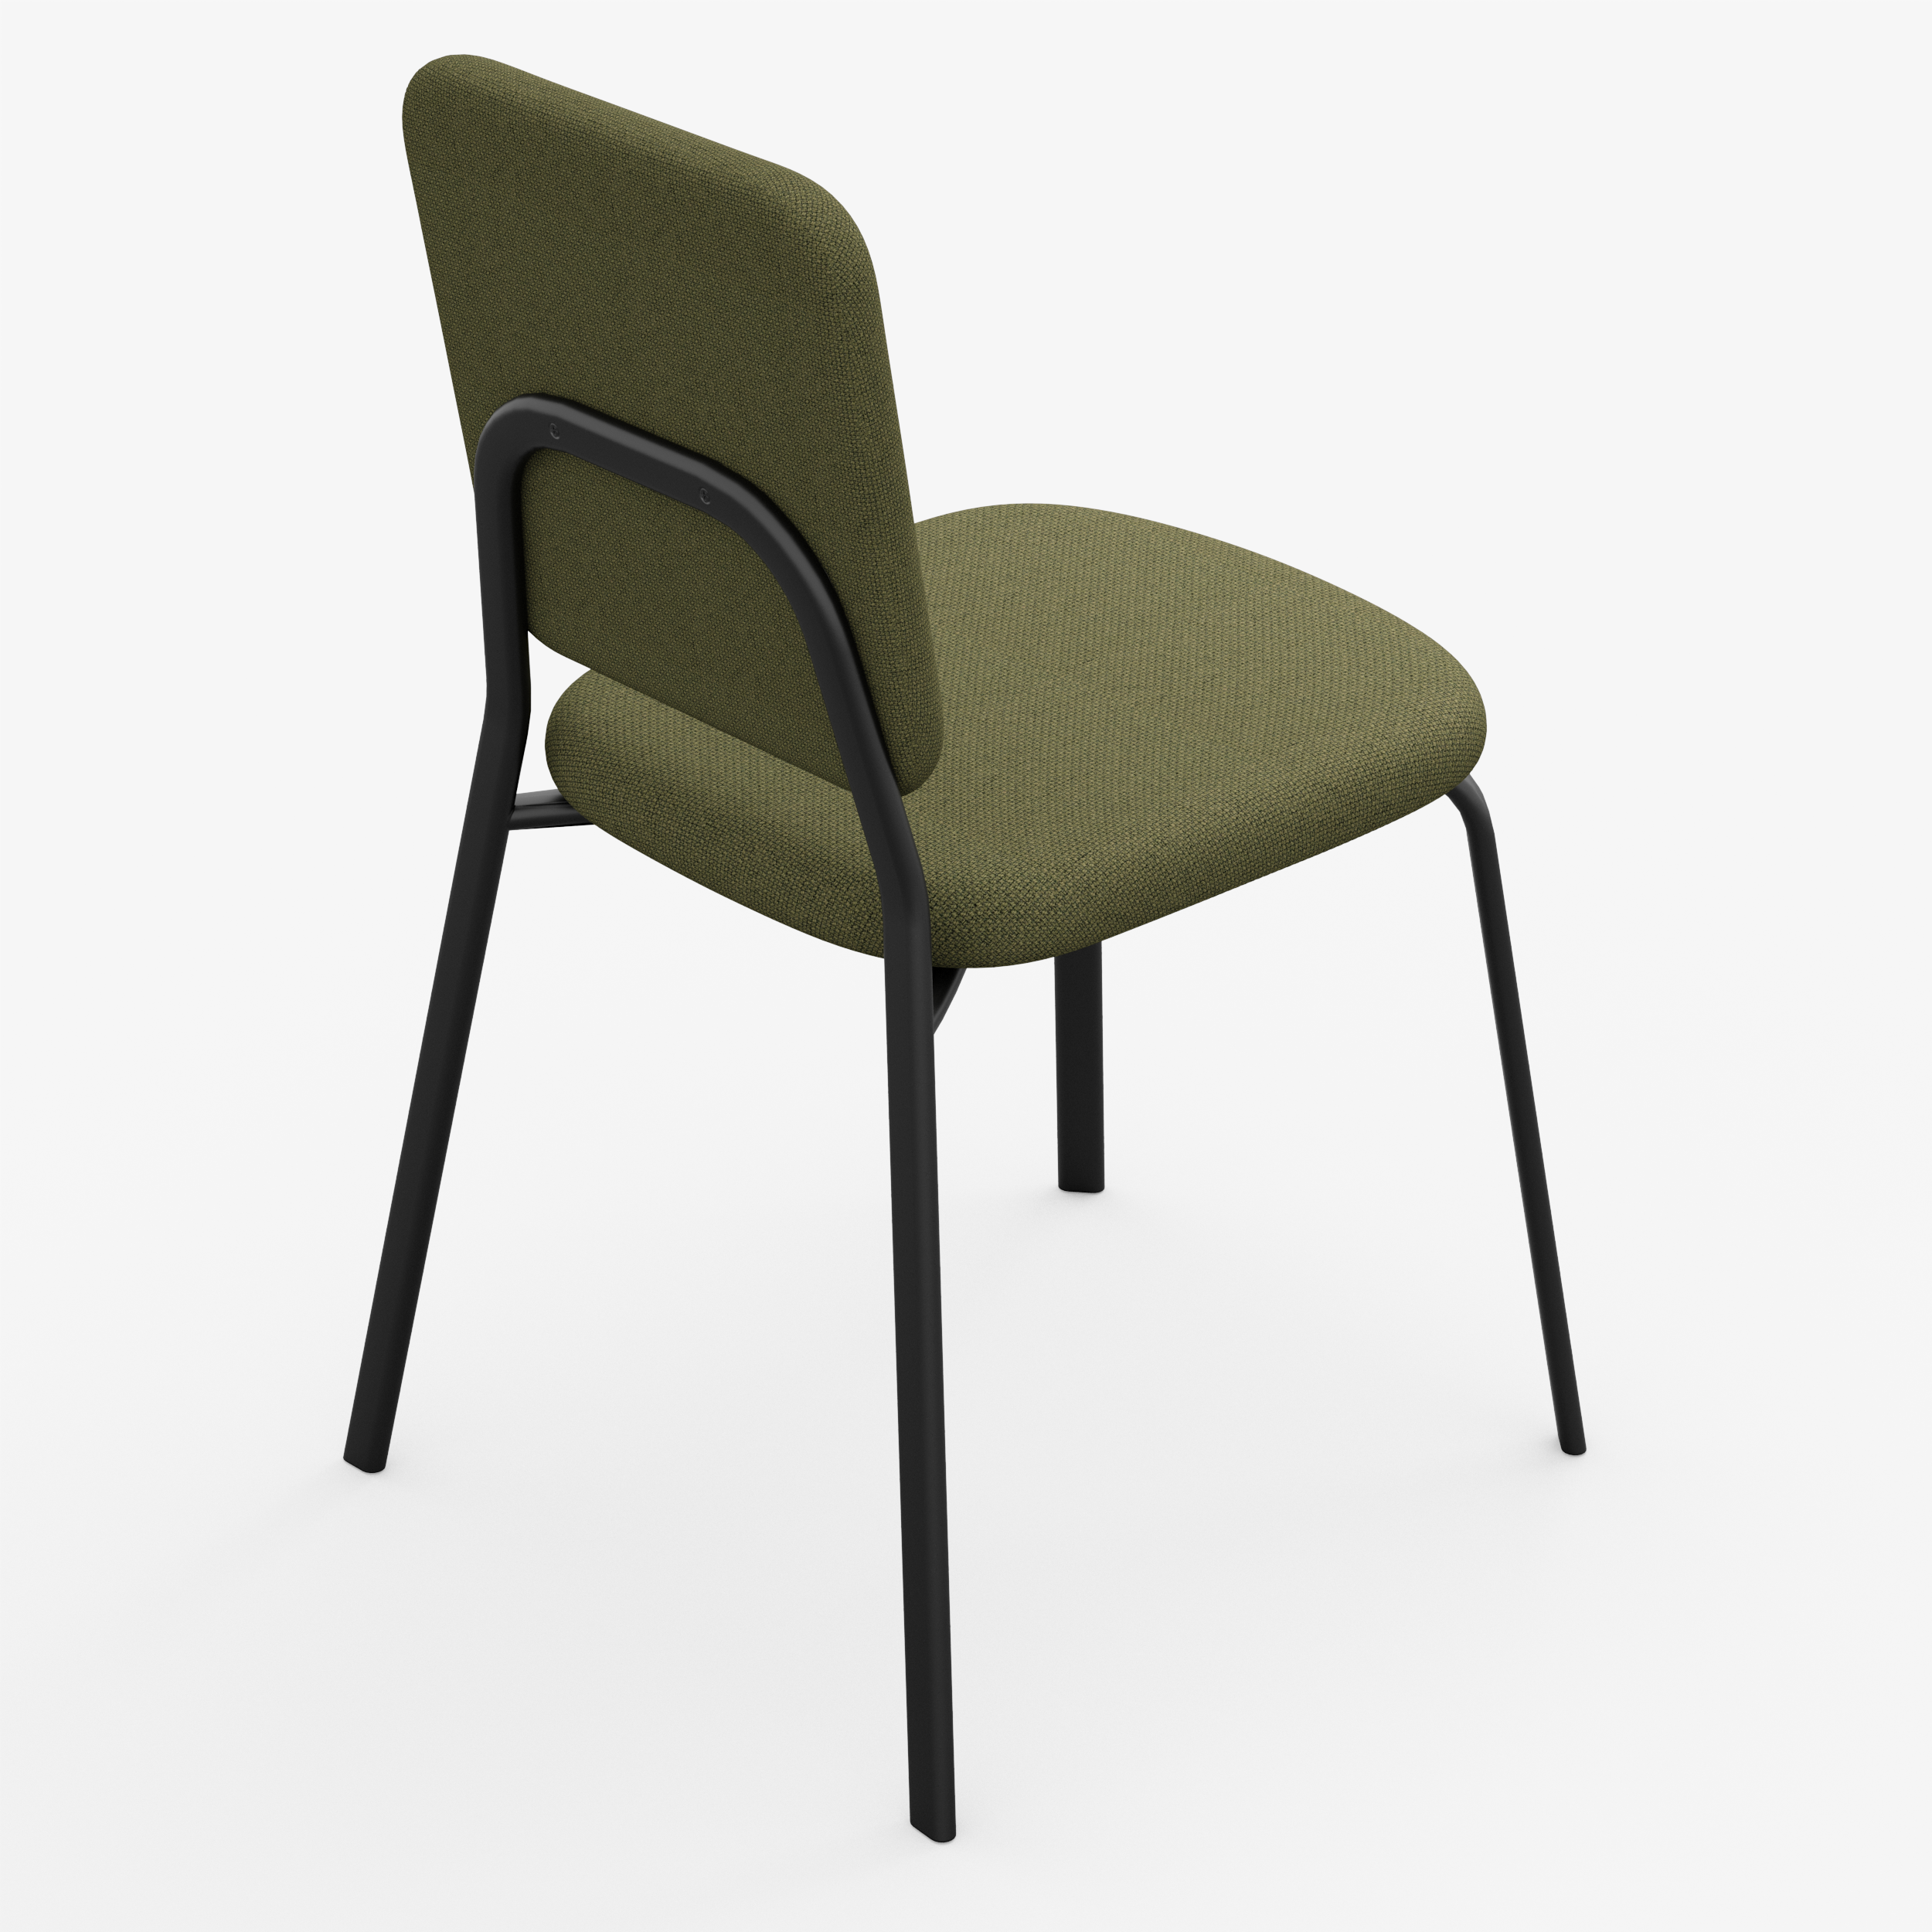 Form - Chair (Square, Olive Green)